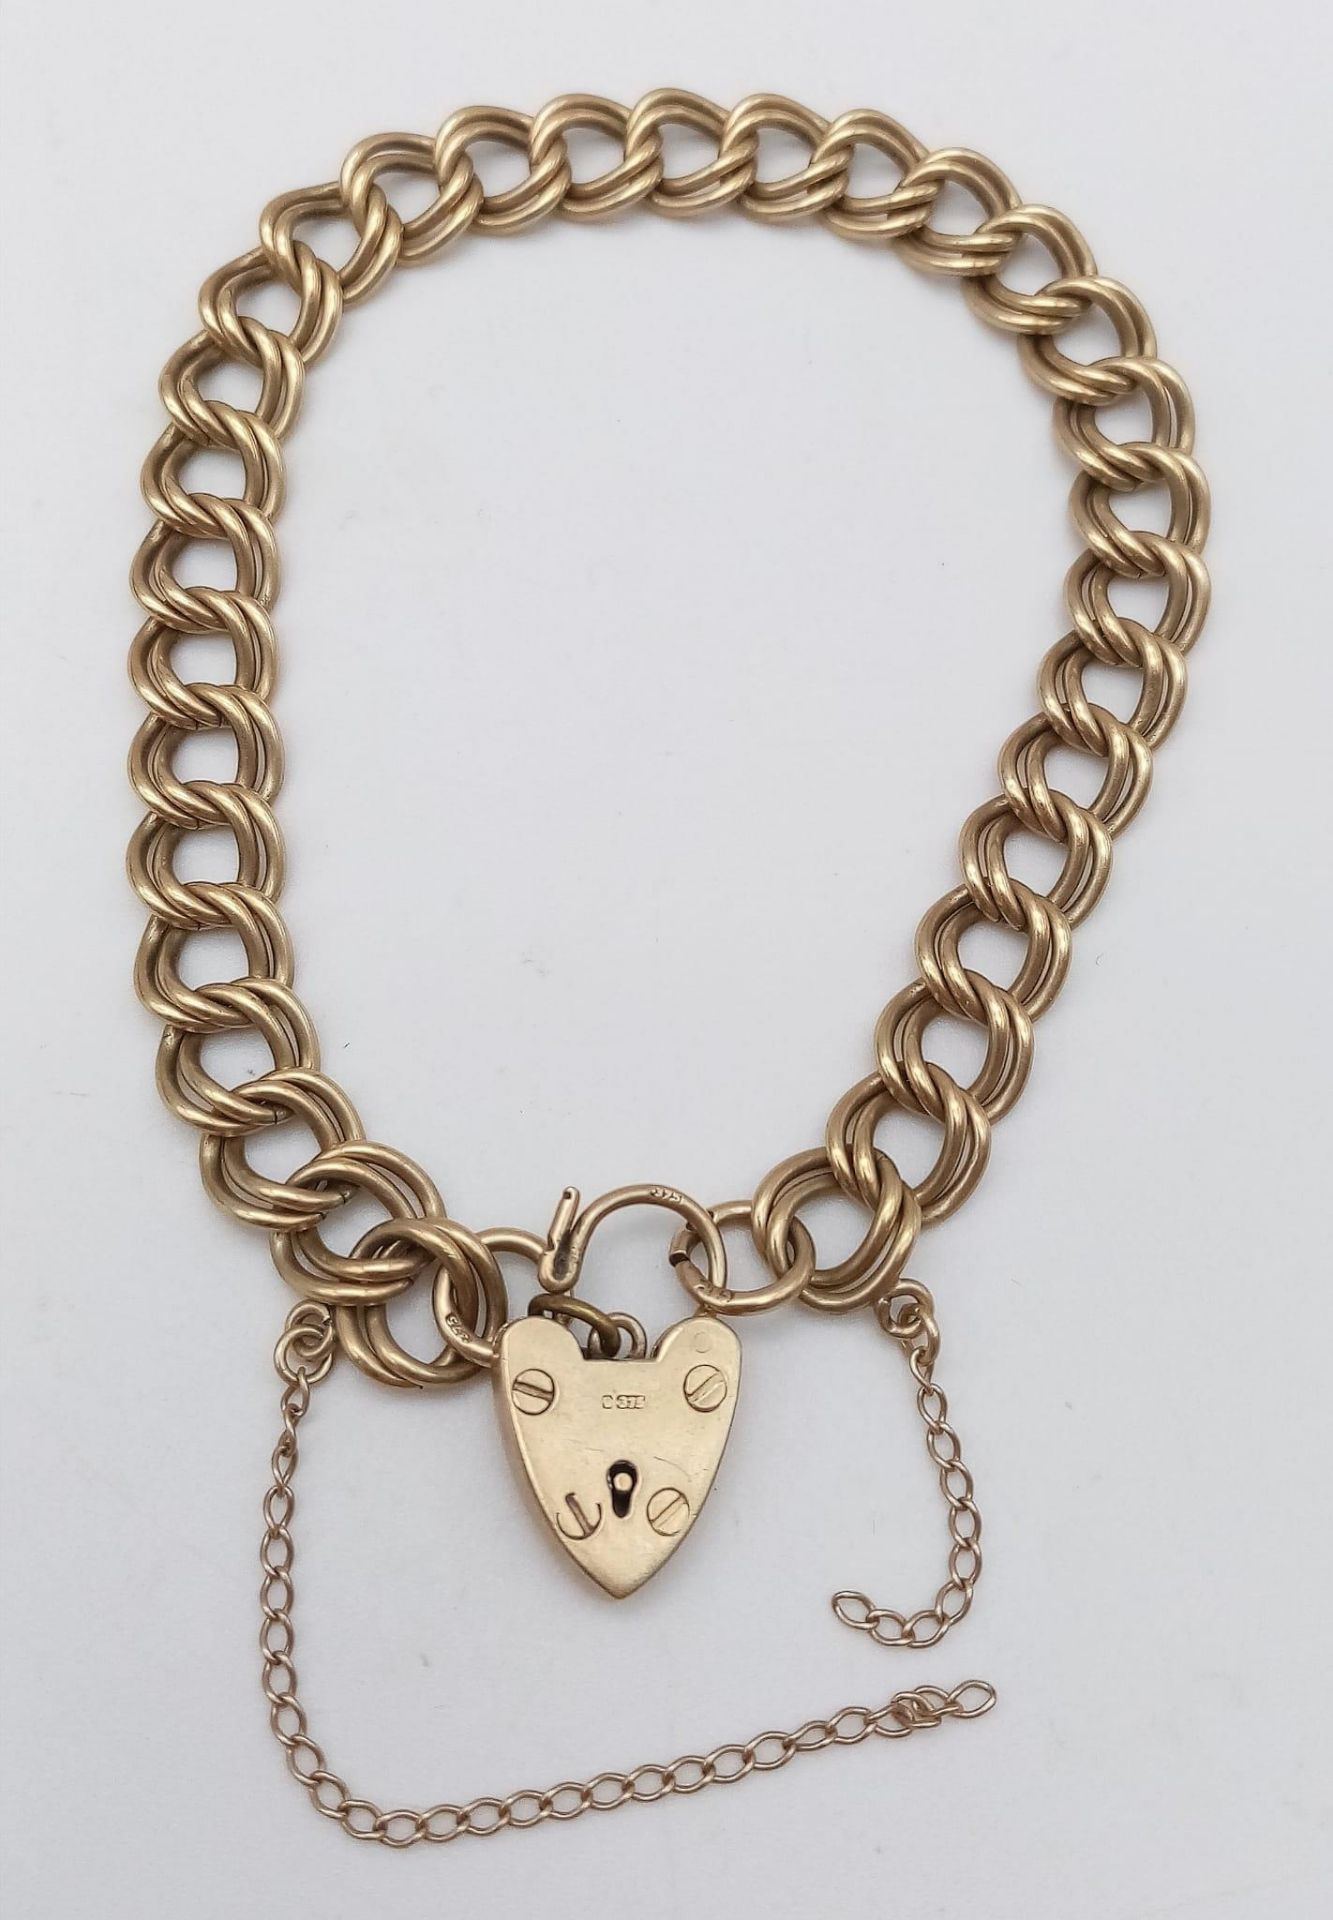 A Vintage 9K Yellow Gold Double Curb Link Bracelet with Heart Clasp. 17cm. 13.54g weight.